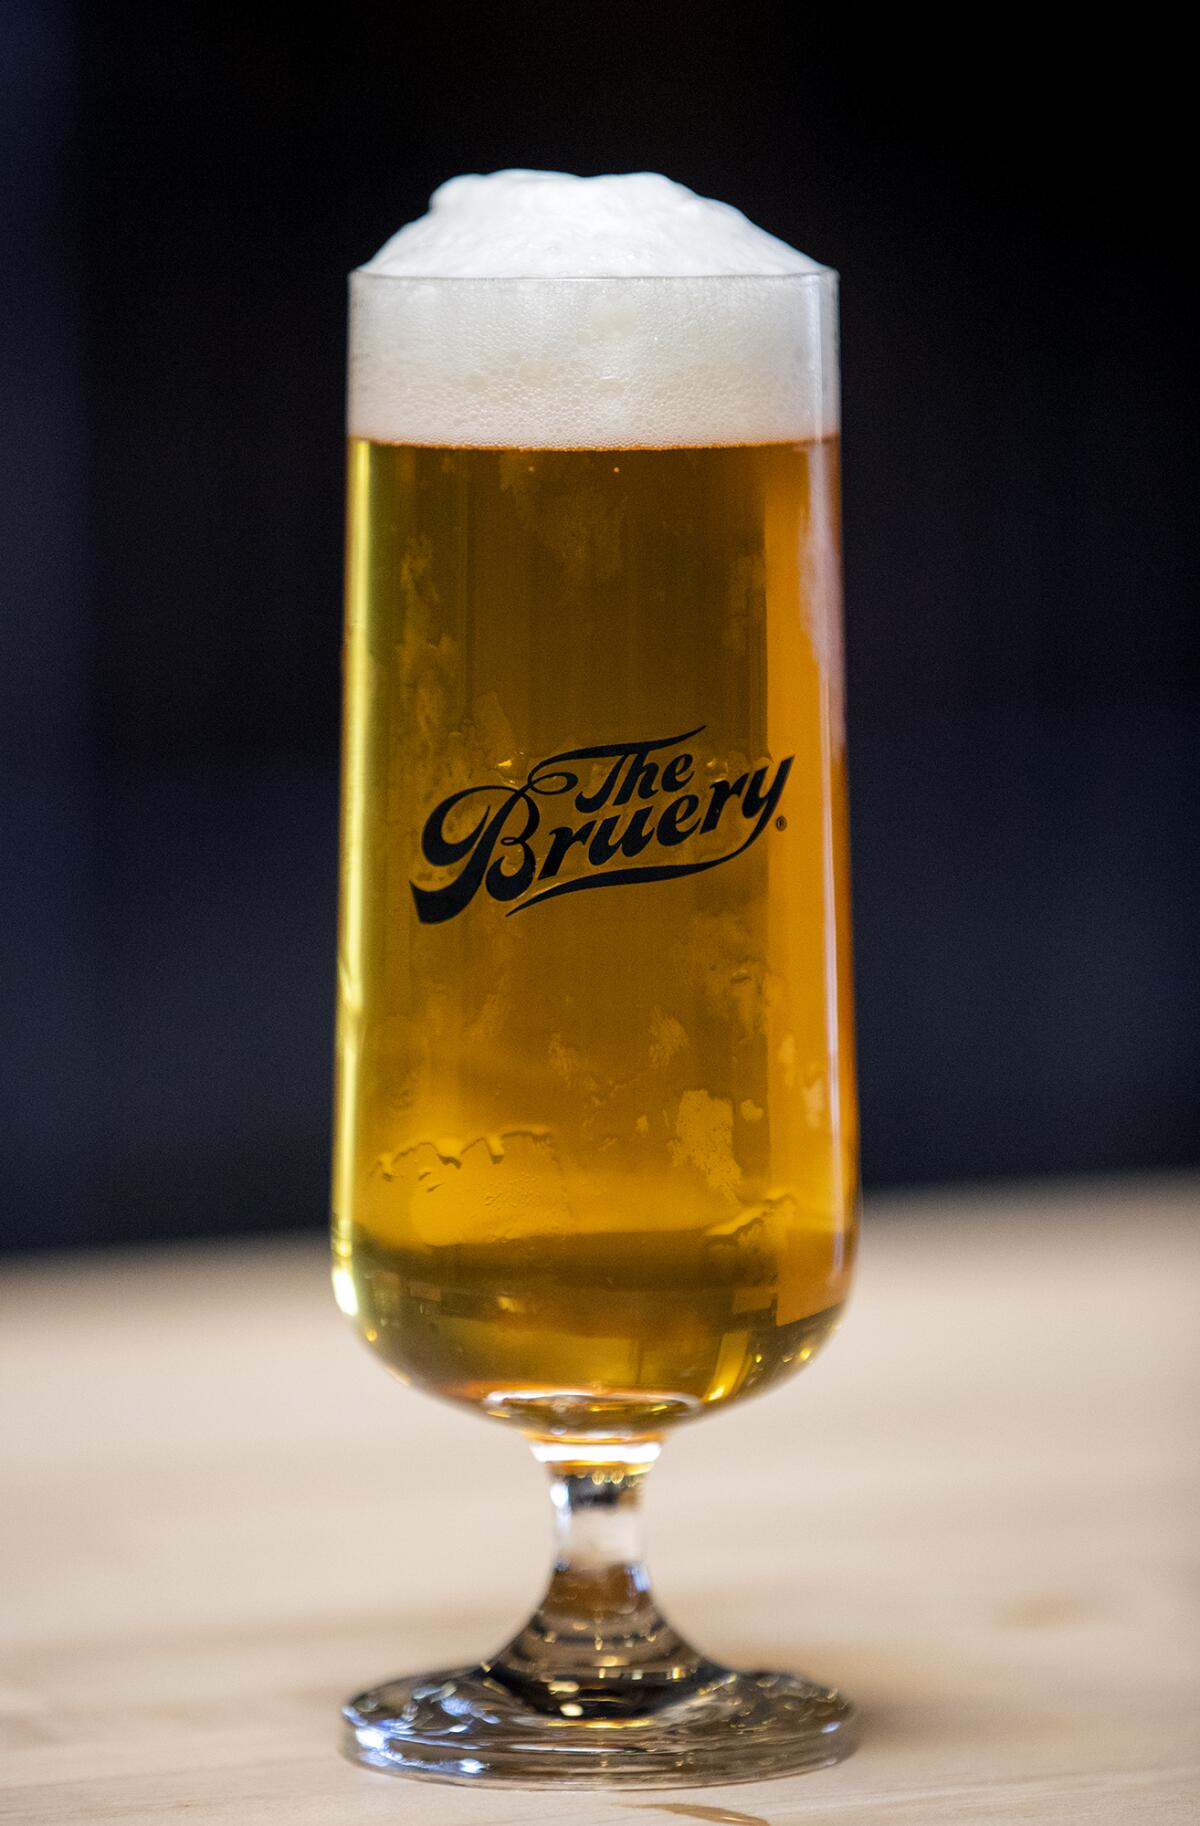 The Ruekeller Helles in a glass at the Bruery in Placentia.